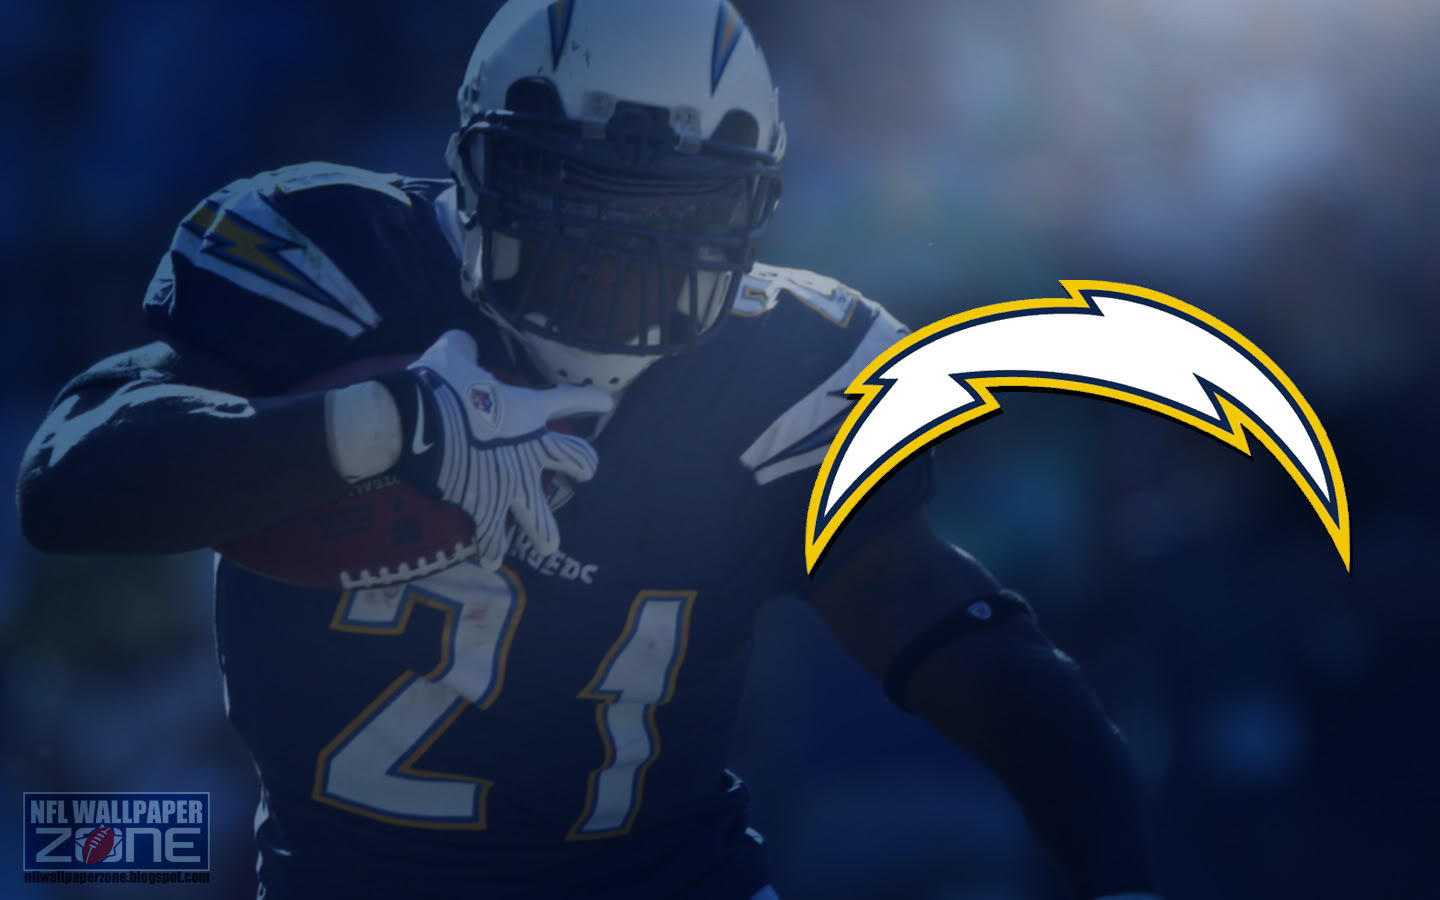 NFLWallpaperZones Bucke San Diego Chargers Wallpaper